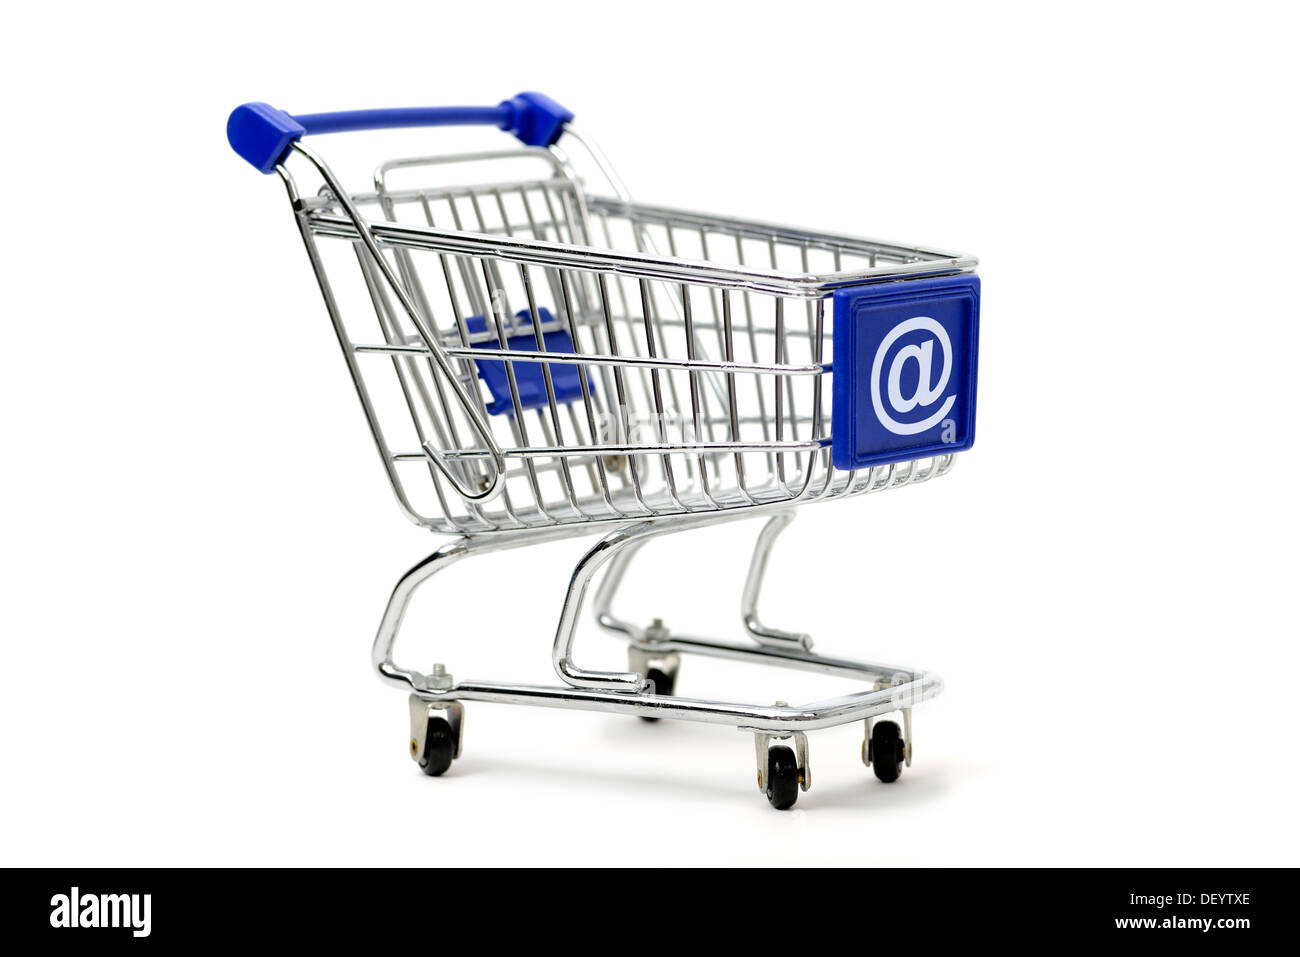 Shopping carts with at-sign, on-line shopping, Einkaufswagen mit at-Zeichen, Onlineshopping Stock Photo